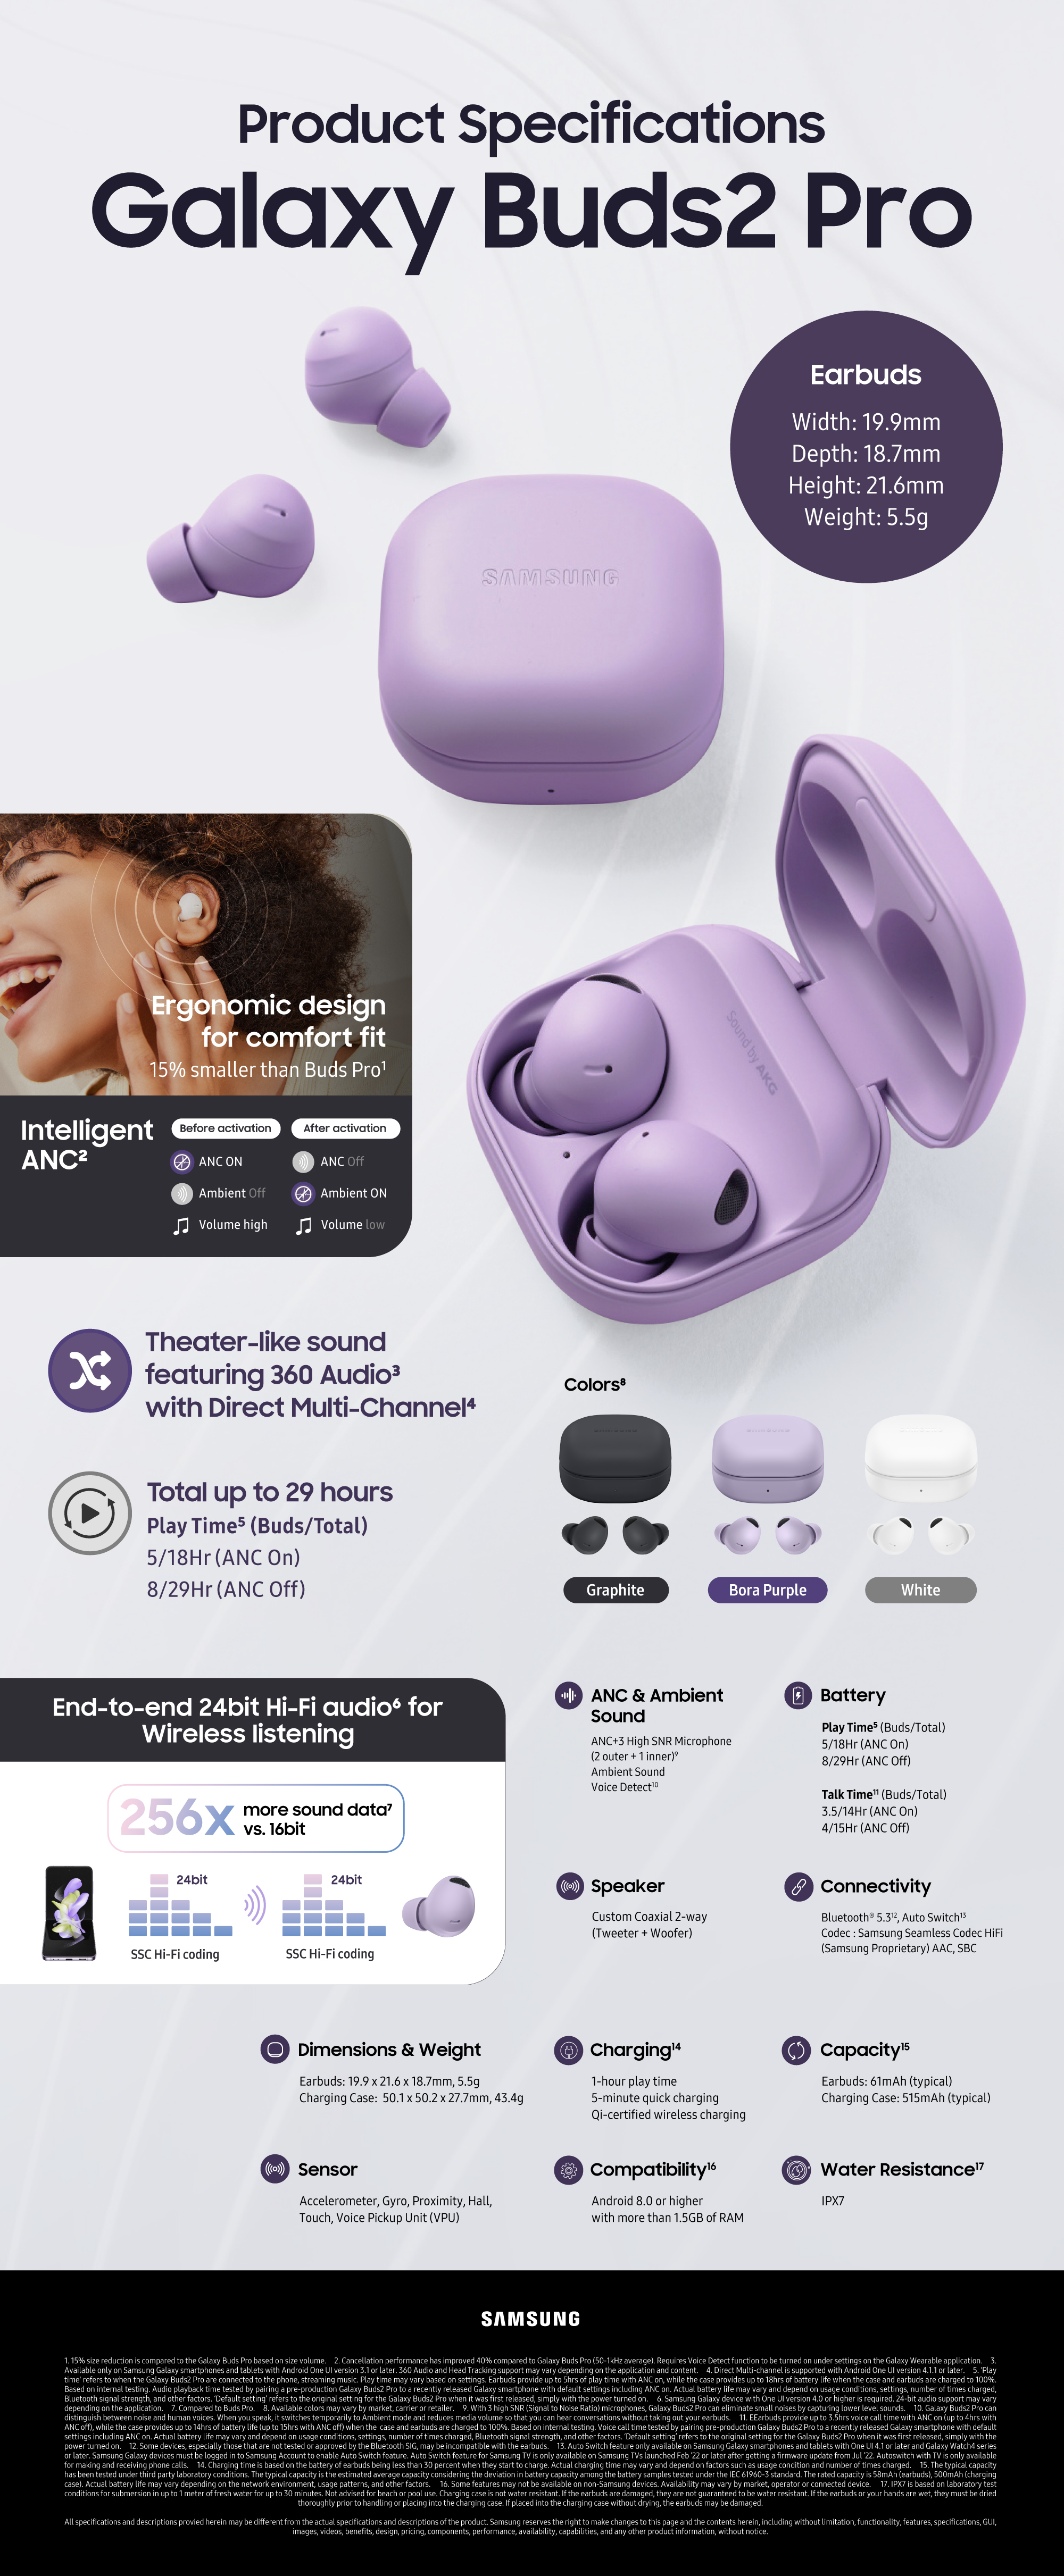 Infographic] Galaxy Buds2 Pro: Taking Immersive Sound Deeper with